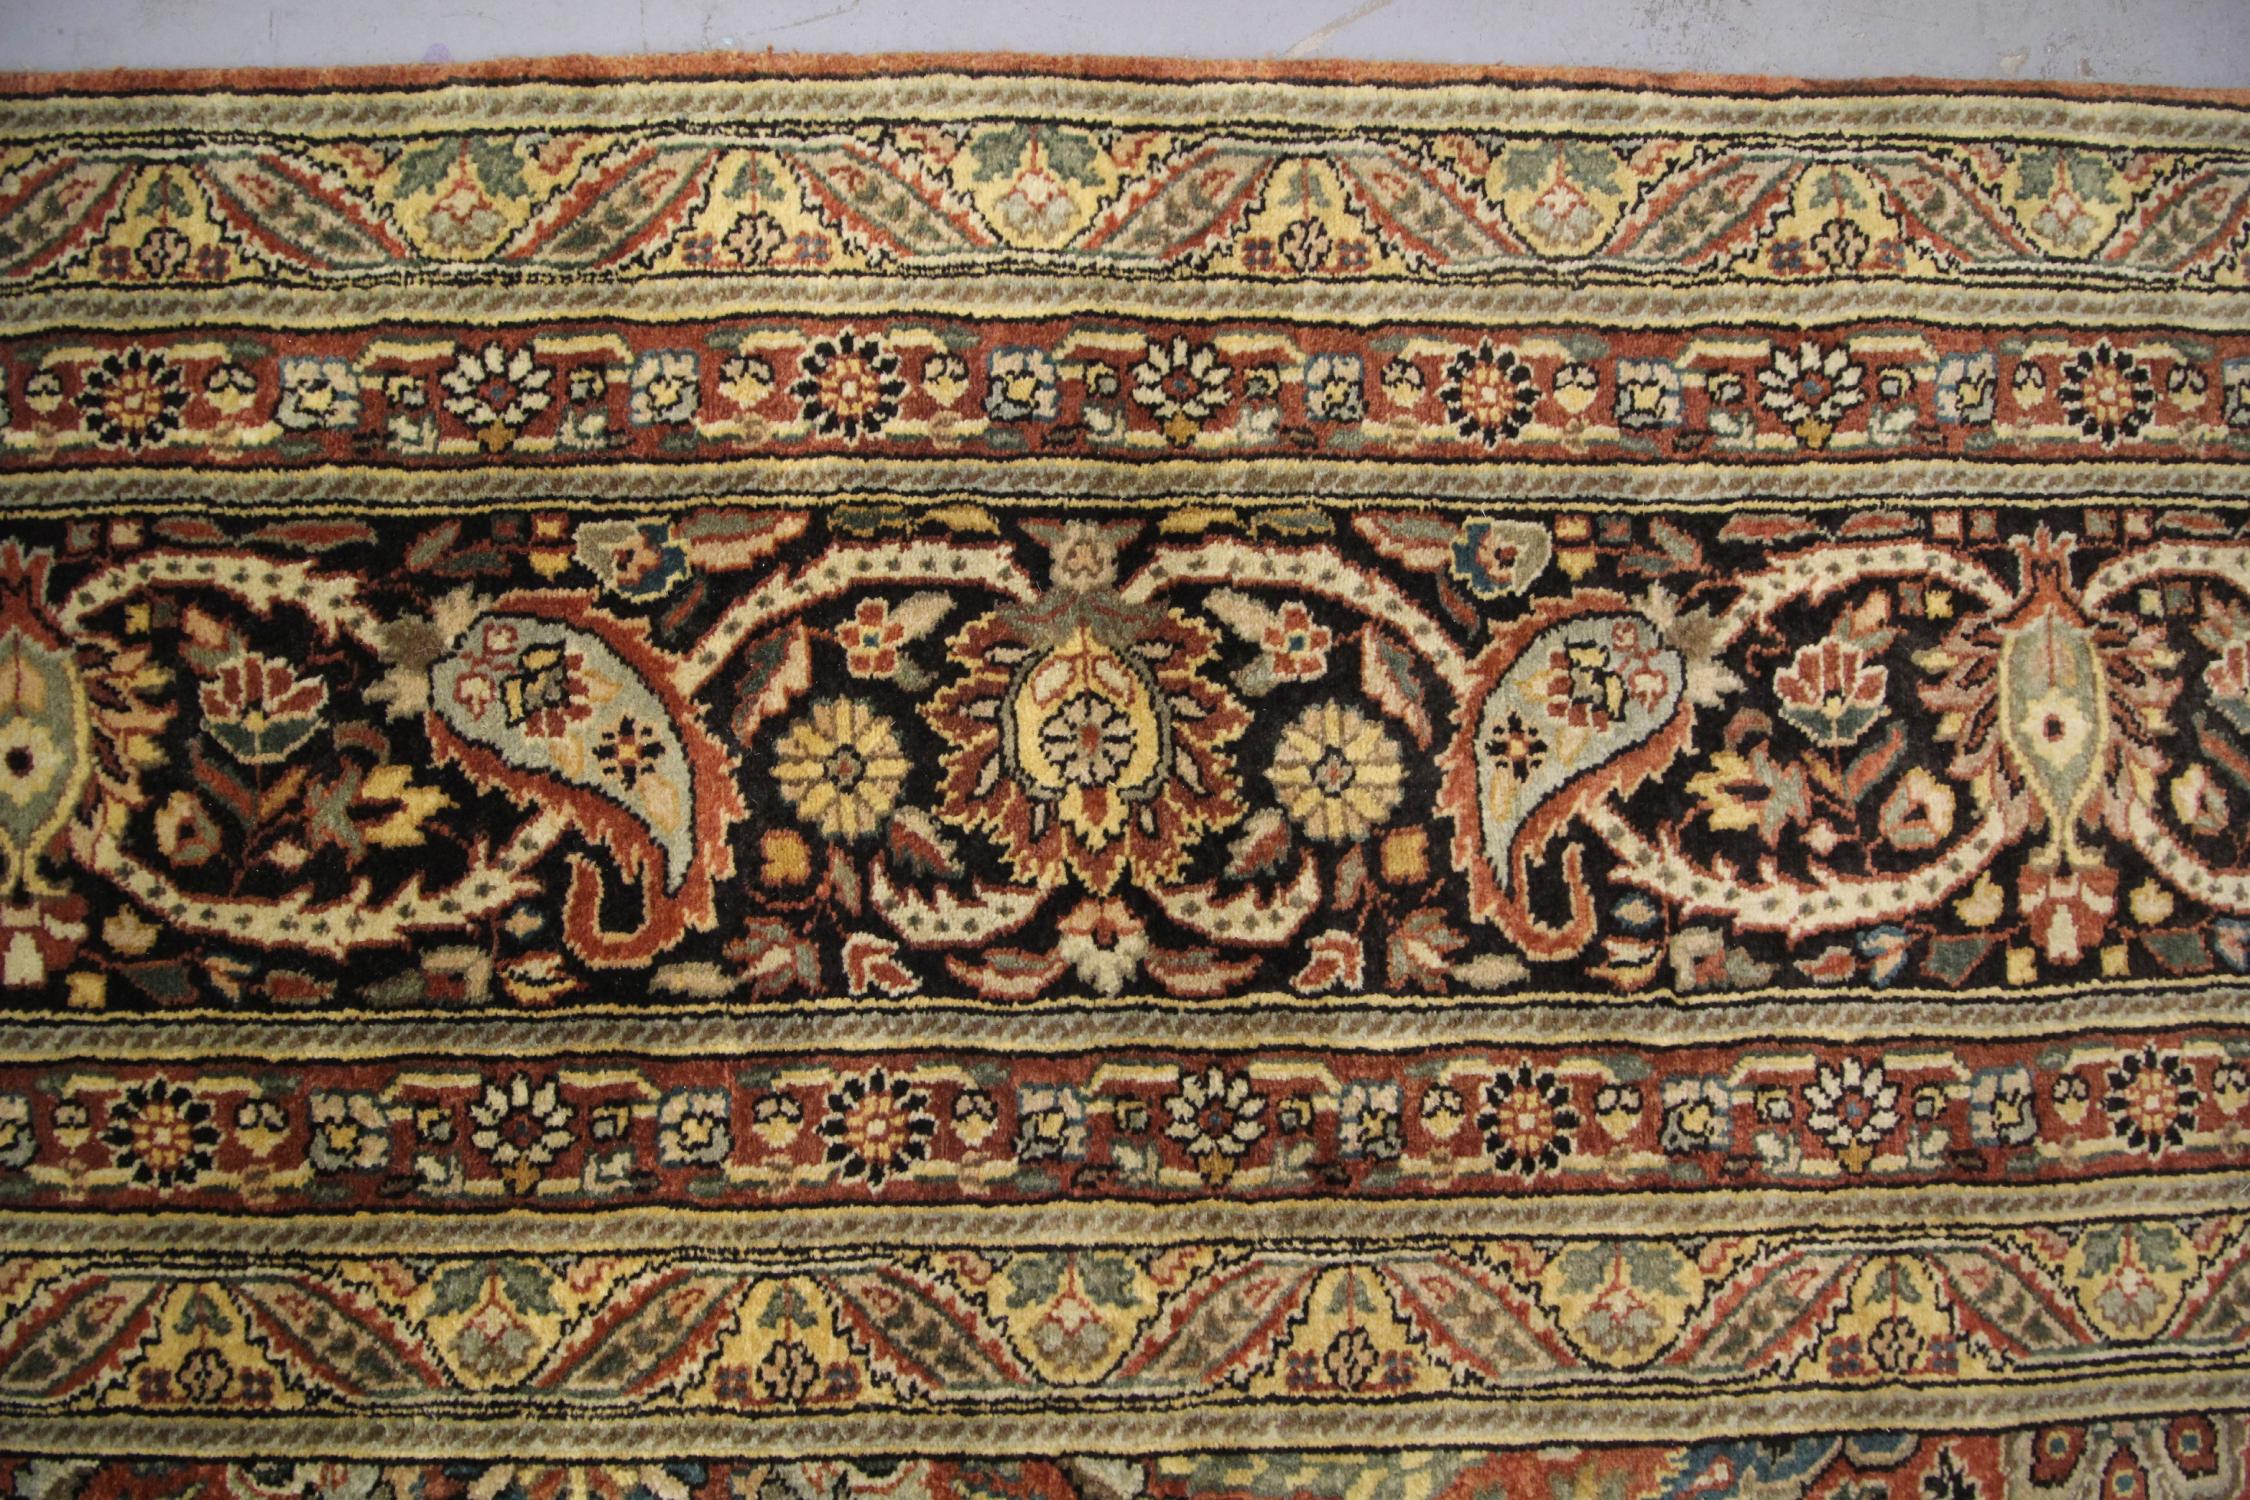 This handmade wool area rug has been woven with a remarkable floral design in accents of brown, beige and cream on a luxurious rust background. This has then been framed by a layered border with decorative paisley patterns. Both the colour and